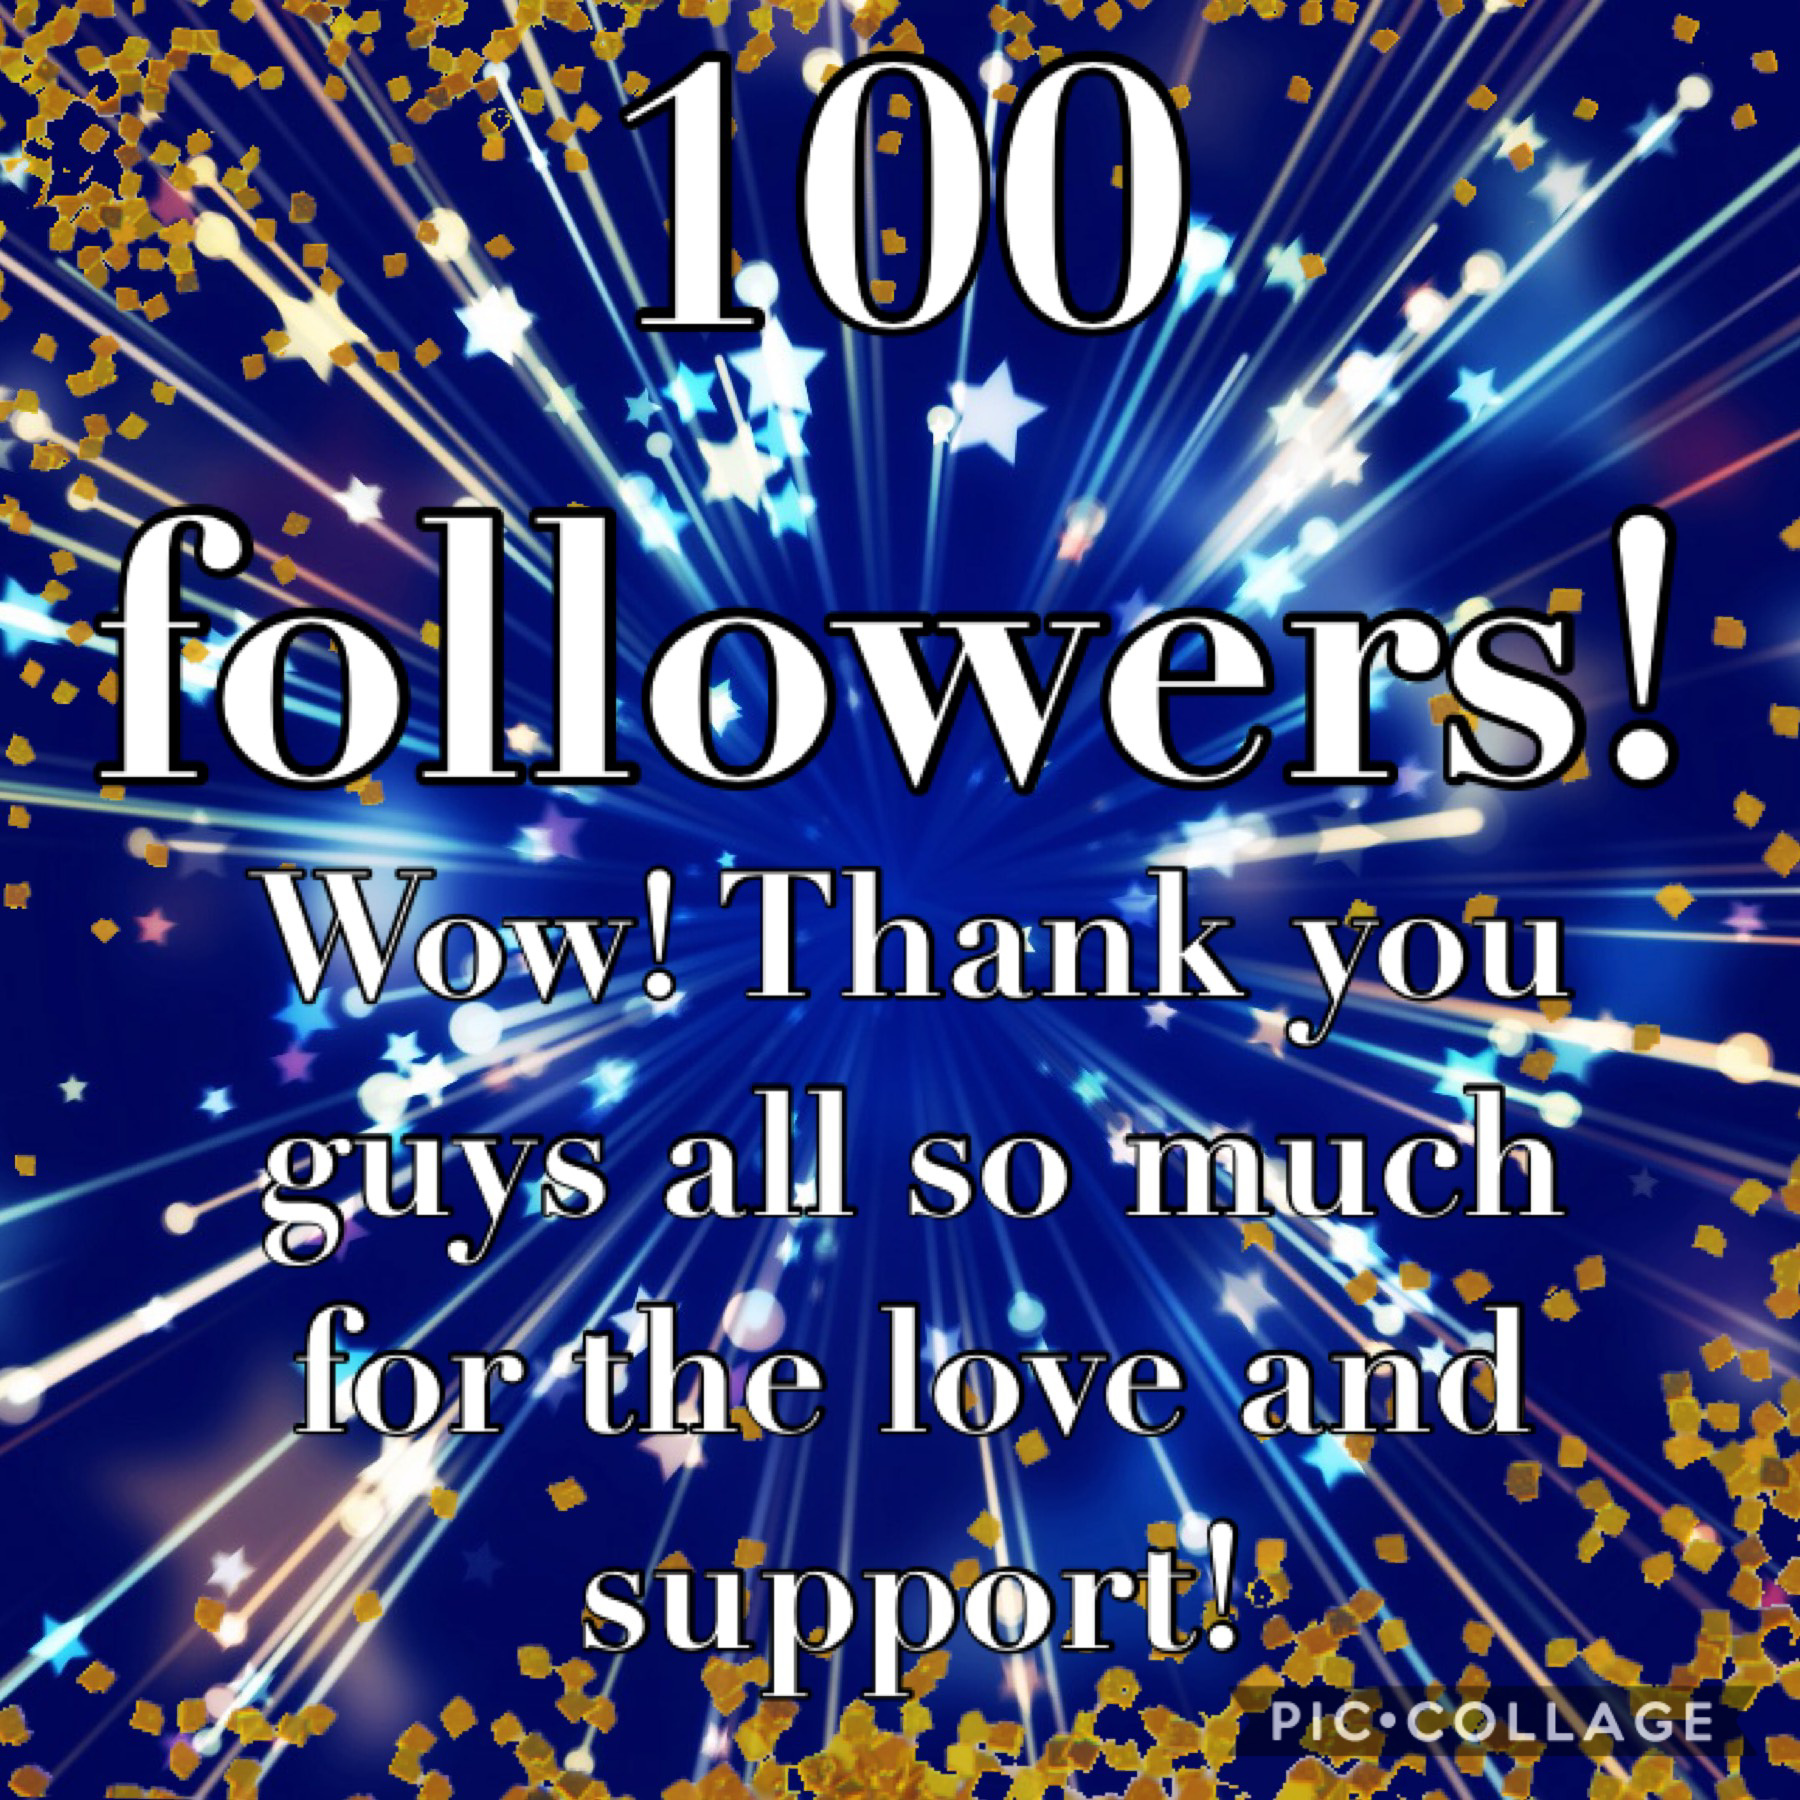 🎉 Thank you!!! 🎉 